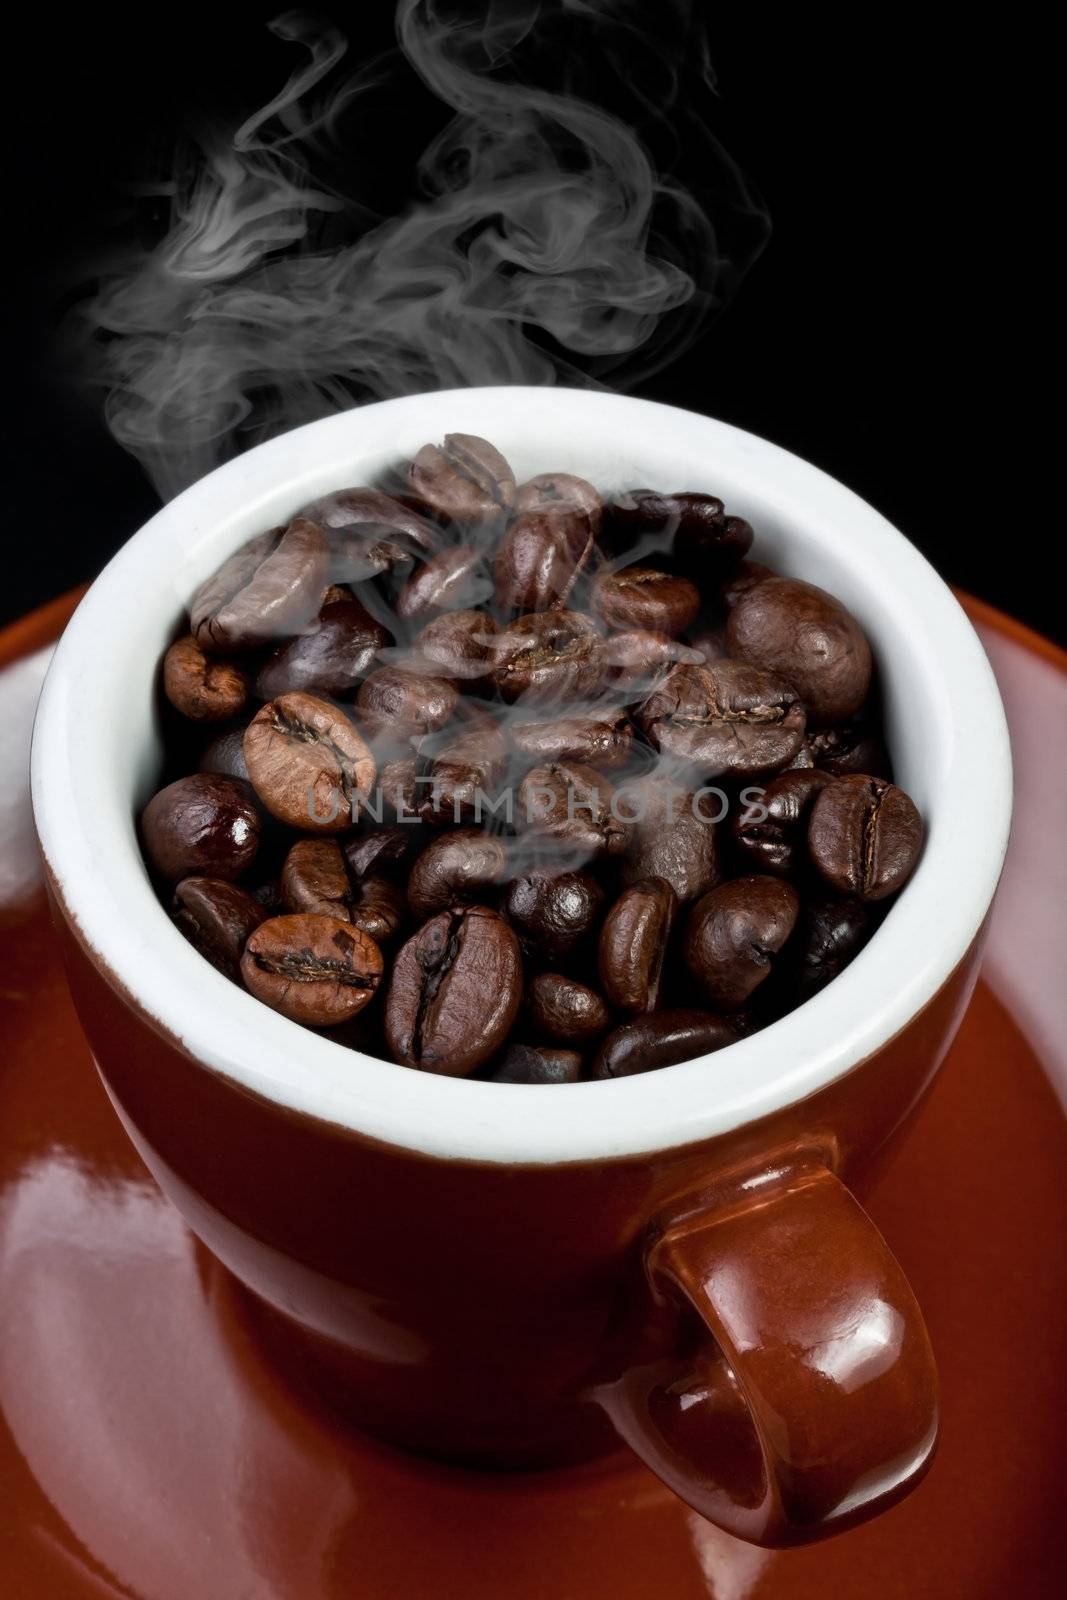 coffee beans on a brown cup